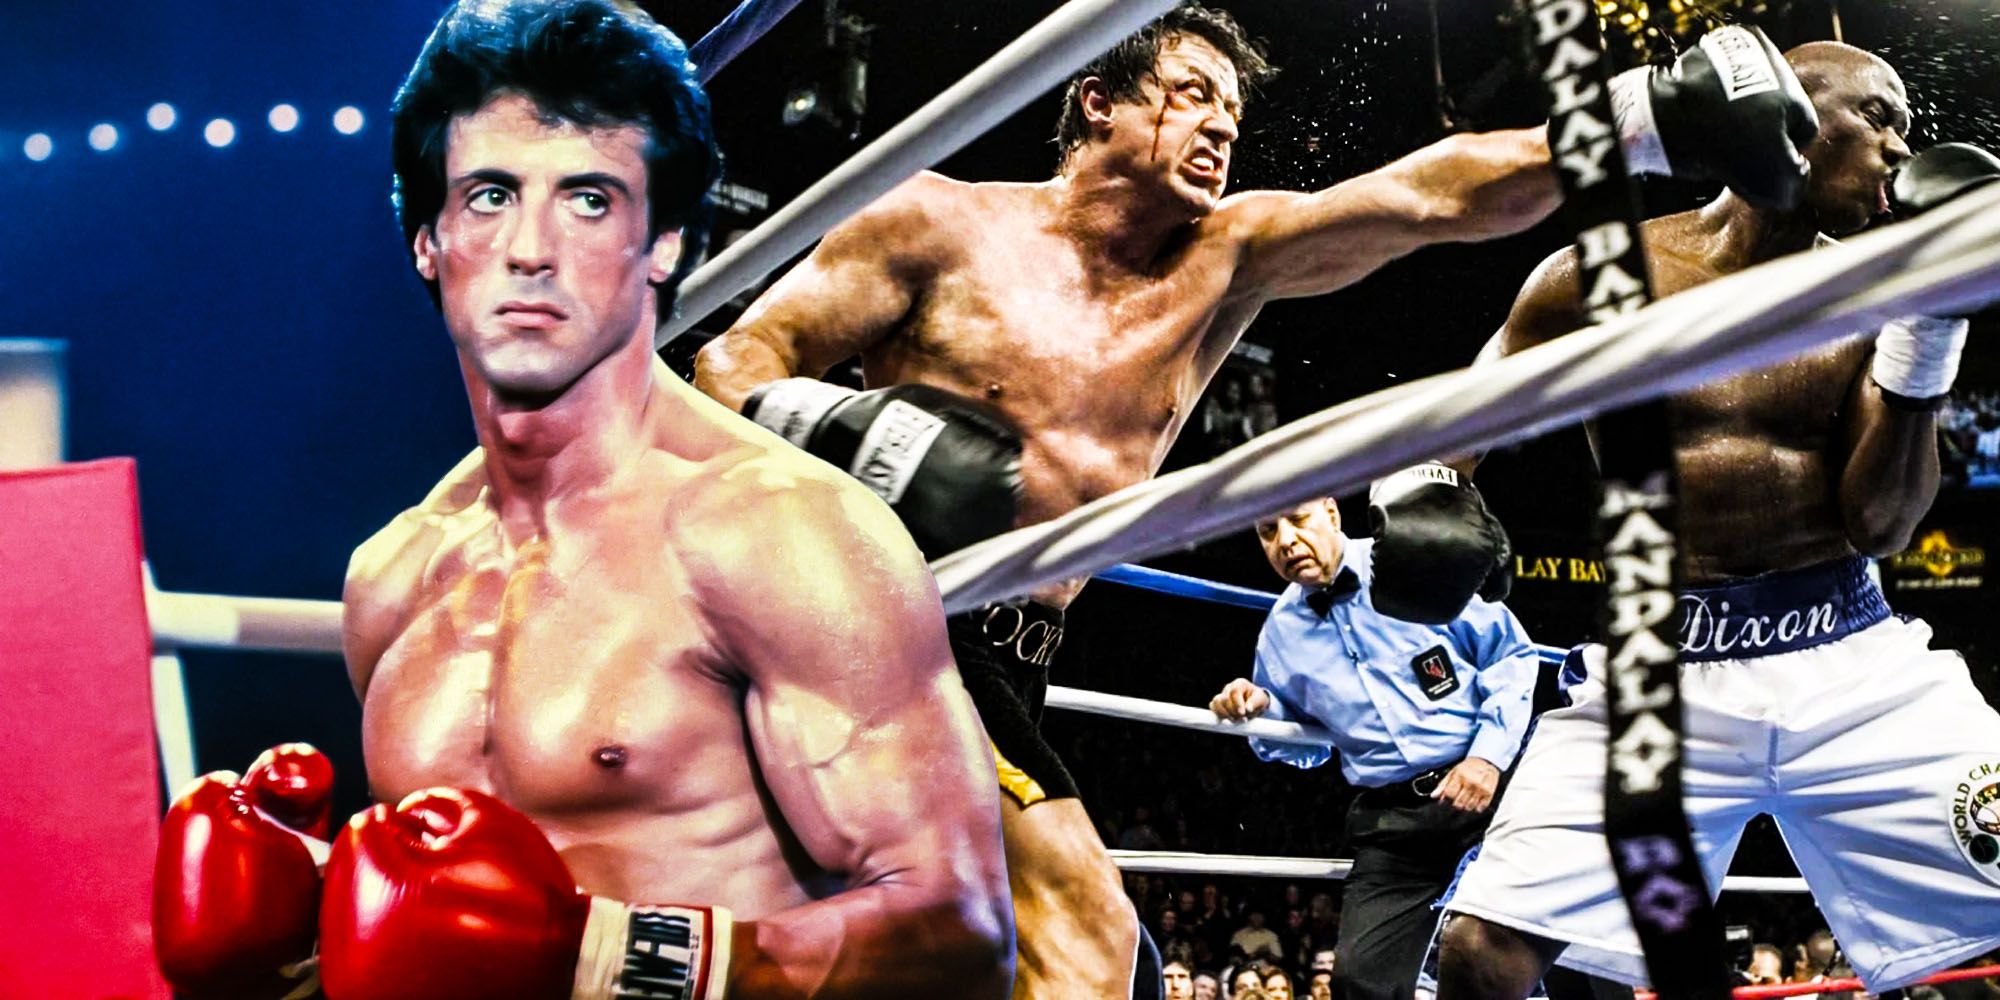 Rocky Balboa is not a good